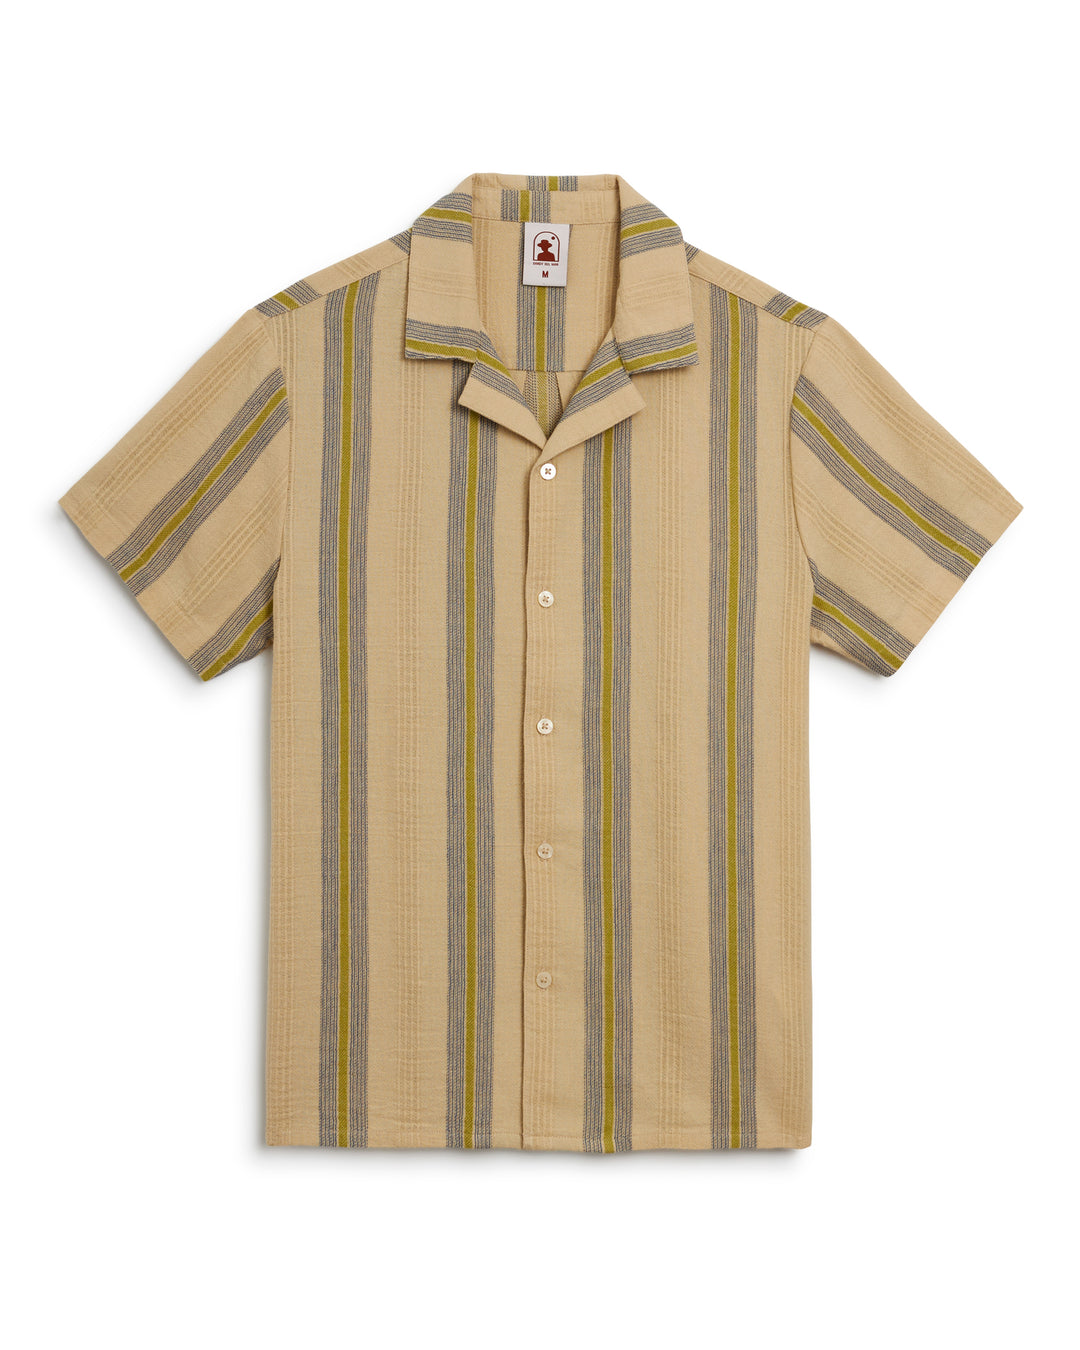 The Ginger Shirt by Dandy Del Mar is a leisurely striped shirt in tan, featuring vibrant yellow and blue stripes. Made from premium gauze fabric, this shirt offers both comfort and style.